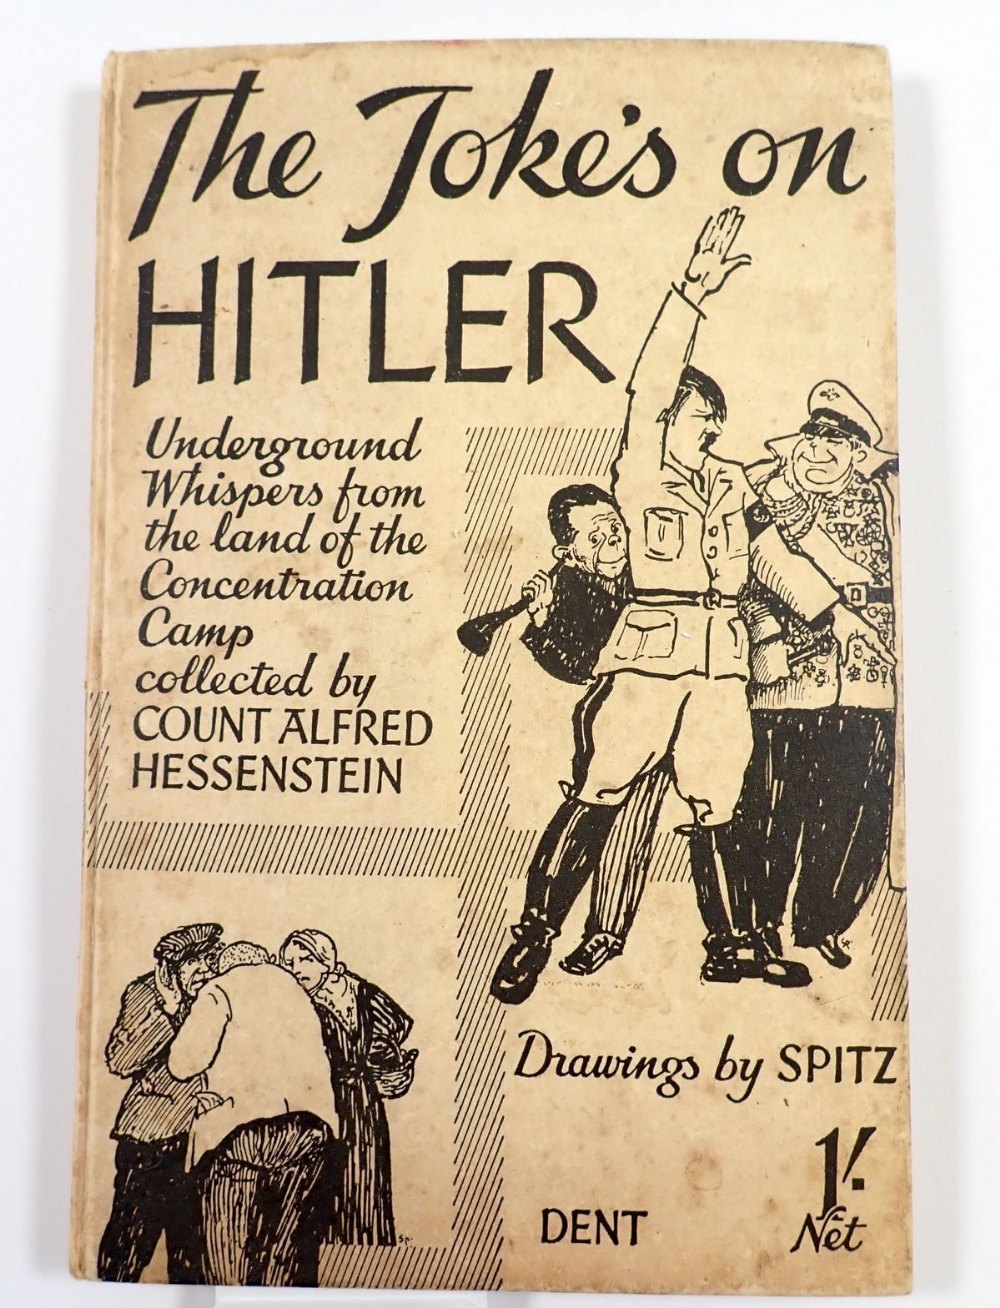 The Jokes on Hitler by Count Alfred Hessenstein with drawings by Spitz